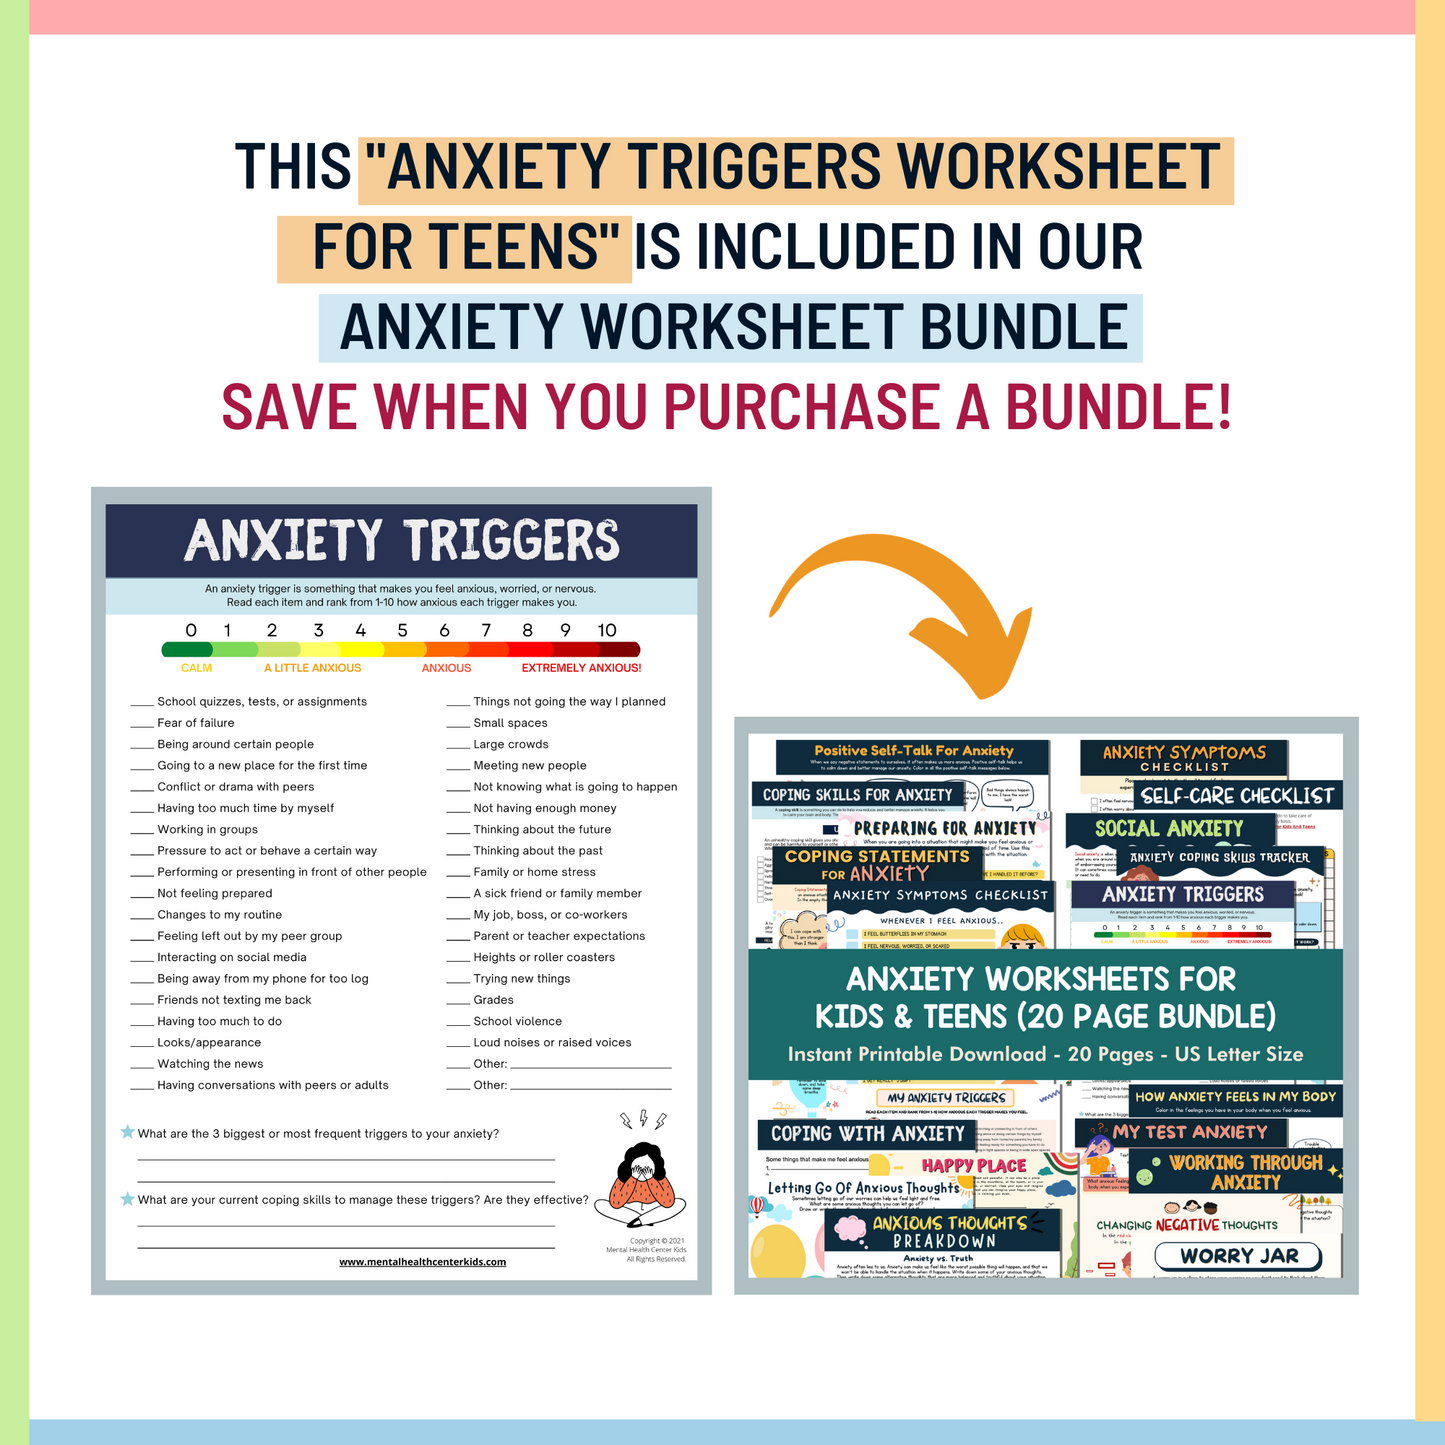 Anxiety Triggers for Teens